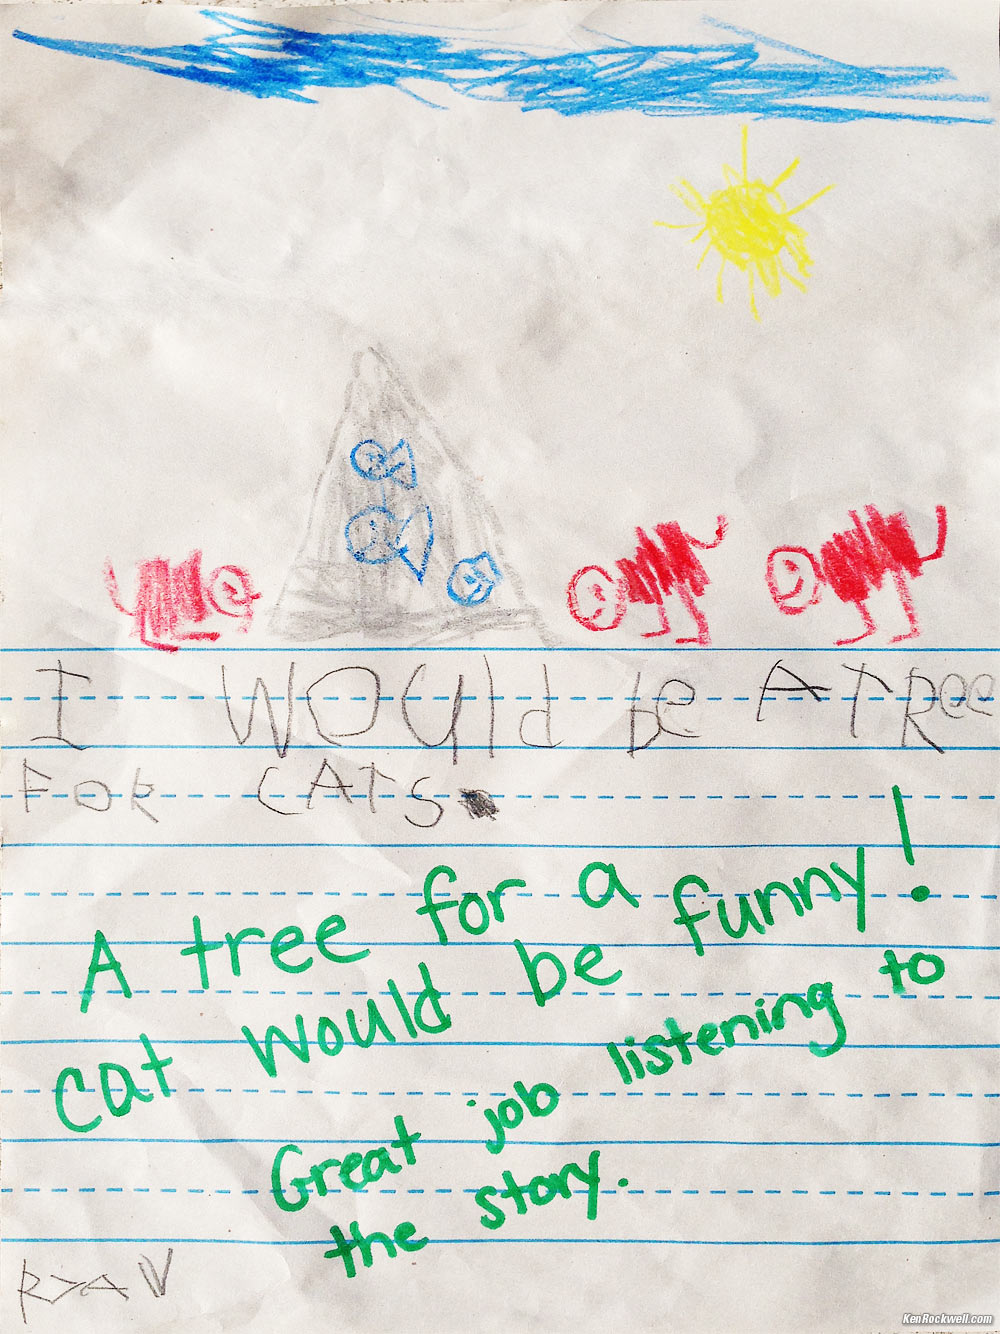 Ryan's "Tree for Cats."